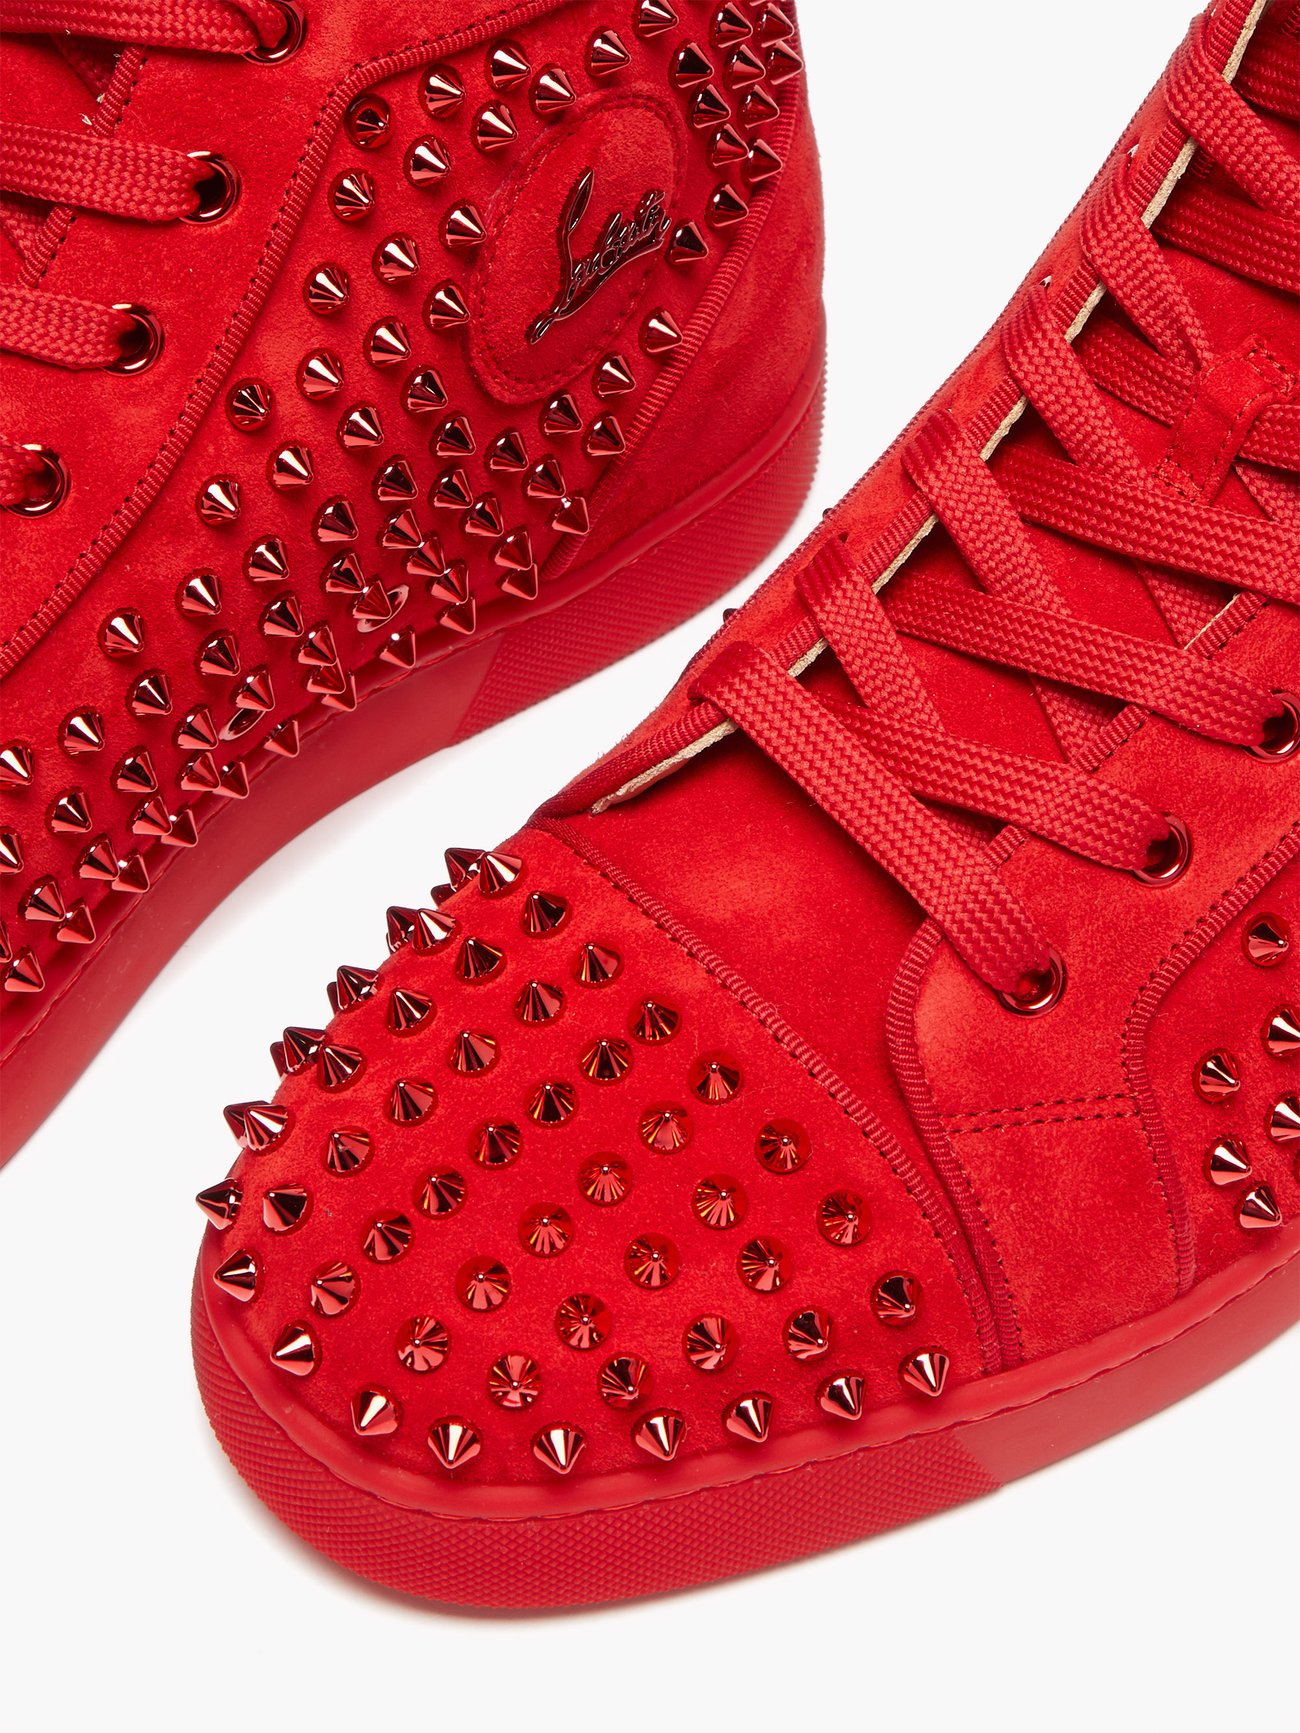 Christian Louboutin Louis Orlato Suede Spikes Red Sneakers New